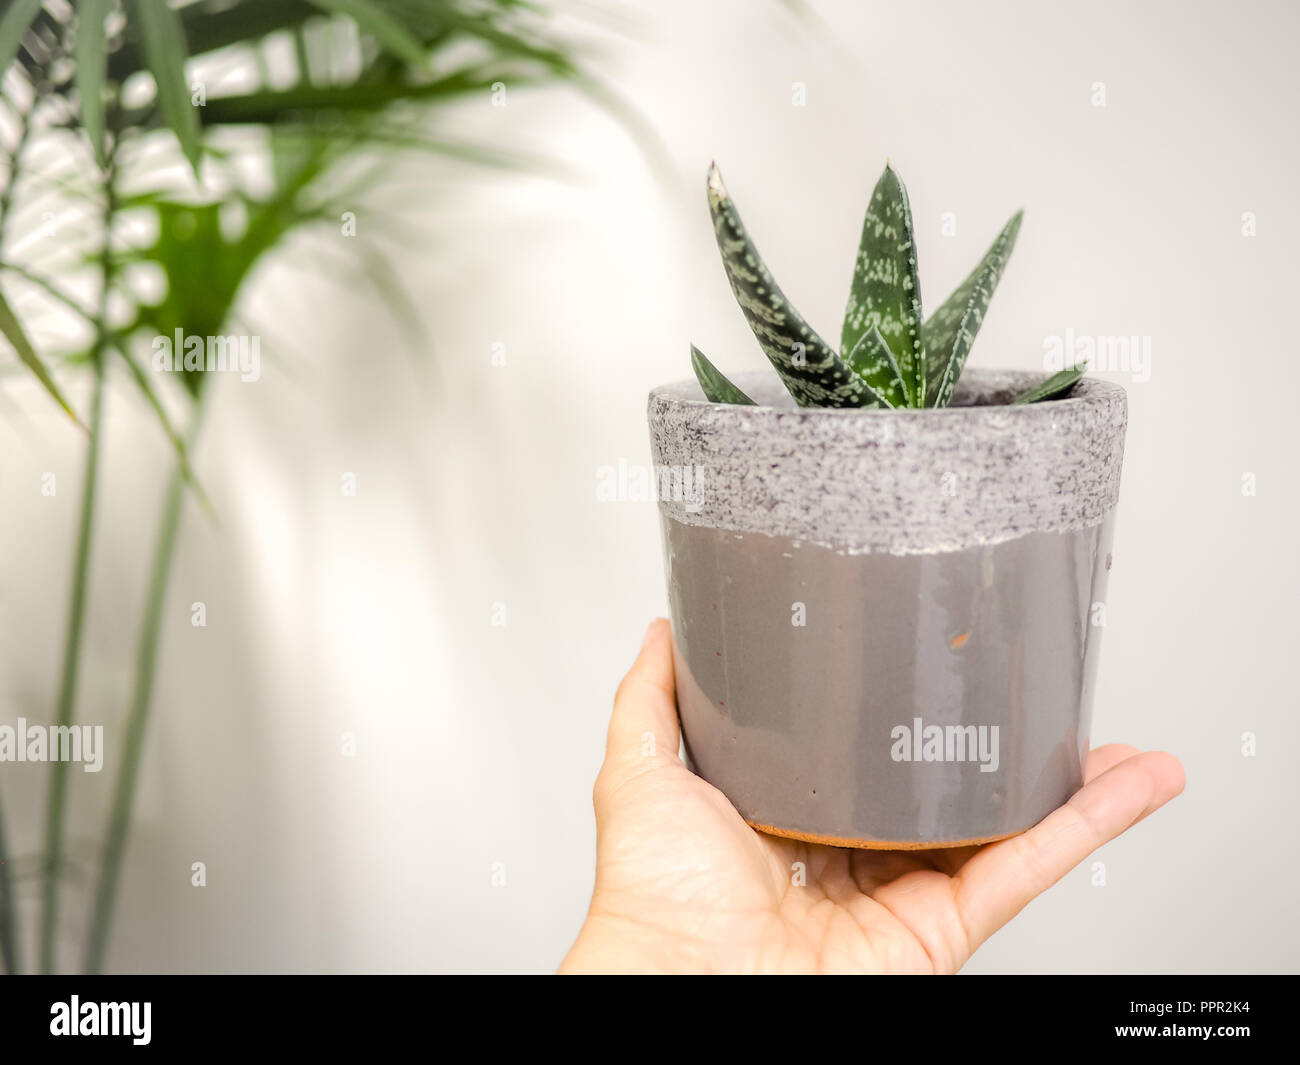 Hand holding a Gasteria Pillansii succulent indoors against a white wall Stock Photo